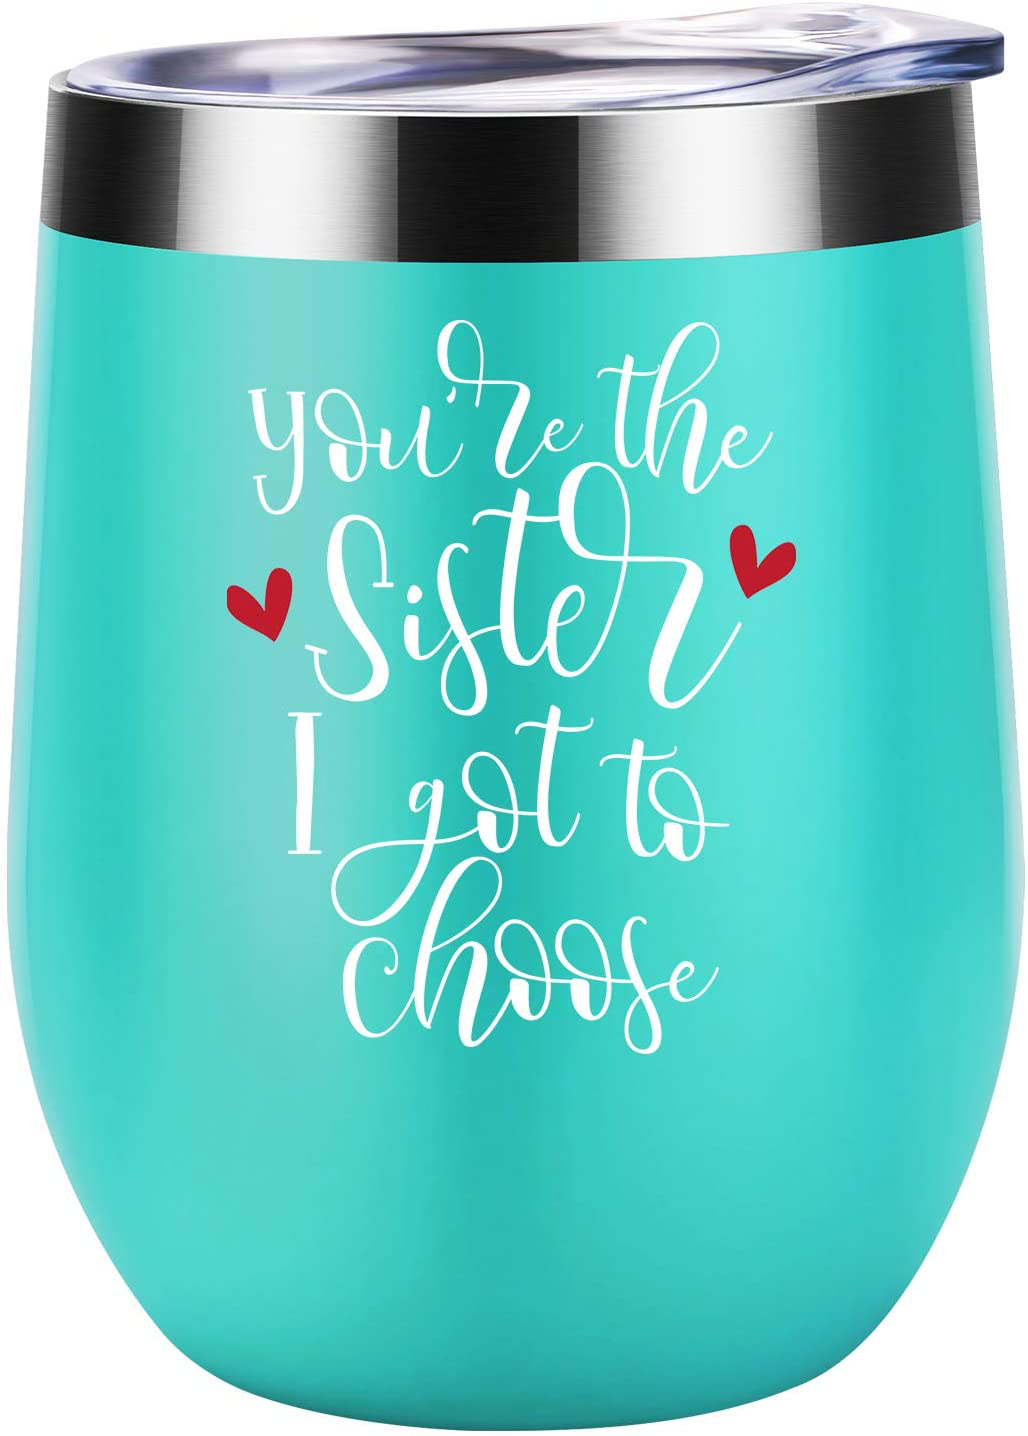 You're the Sister I Got to Choose - Like Sisters Gifts, Sorority Gifts - Best Friend, Friendship Gifts for Women - Christmas, Birthday Gifts for Soul Unbiological Sister, BFF - Coolife Wine Tumbler